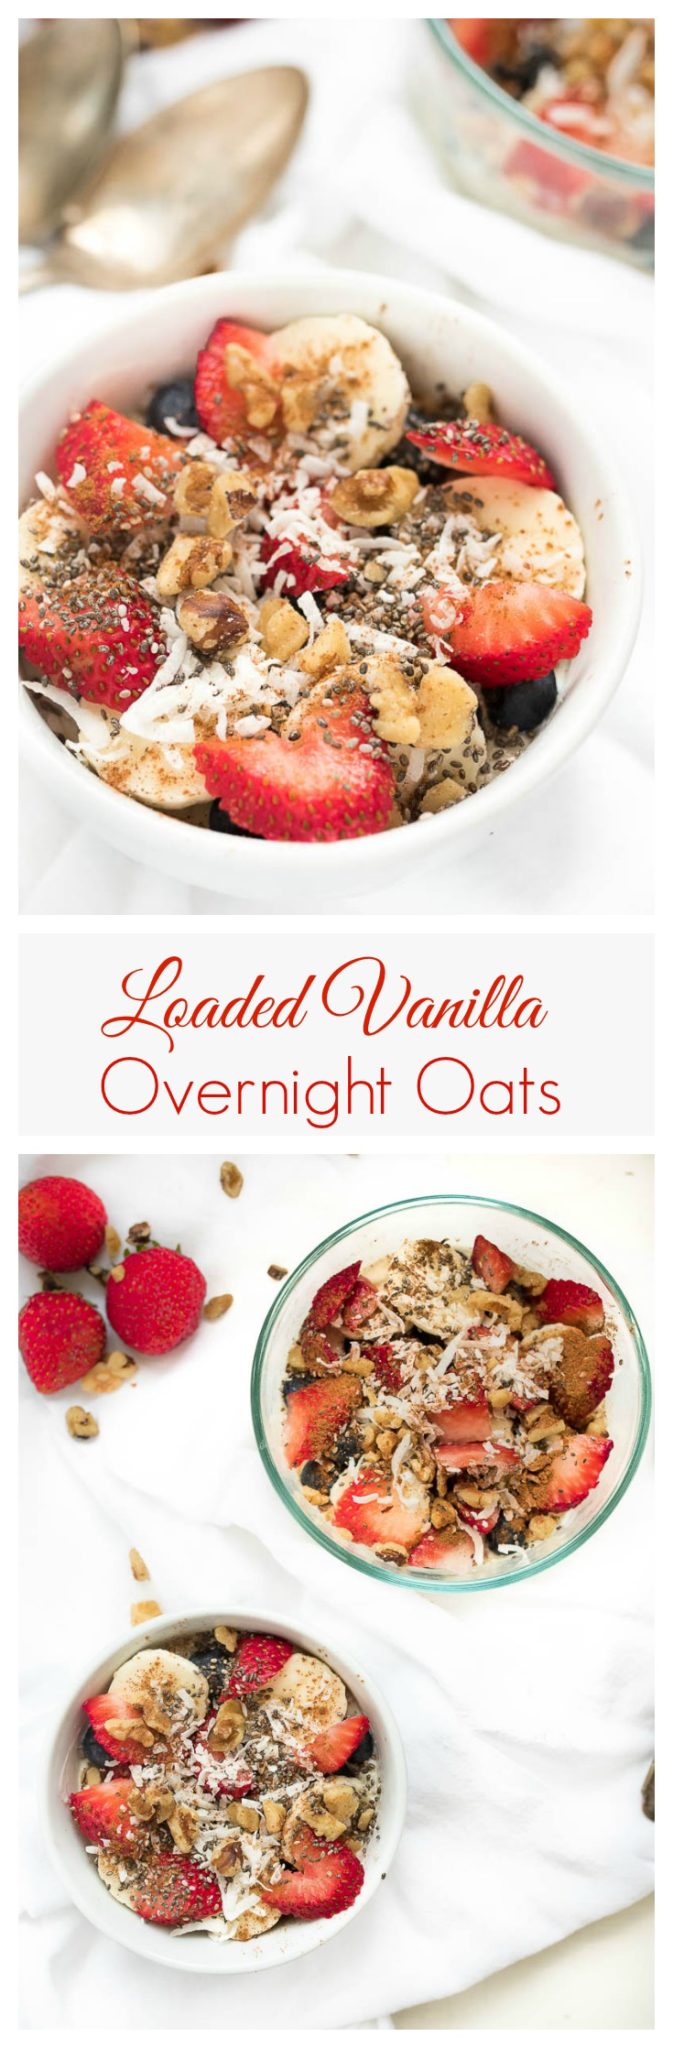 Loaded Vanilla Overnight Oats- the prefect make-ahead, healthy breakfast. Easy to make, easy to customize! #glutenfree | www.nutritiouseats.com